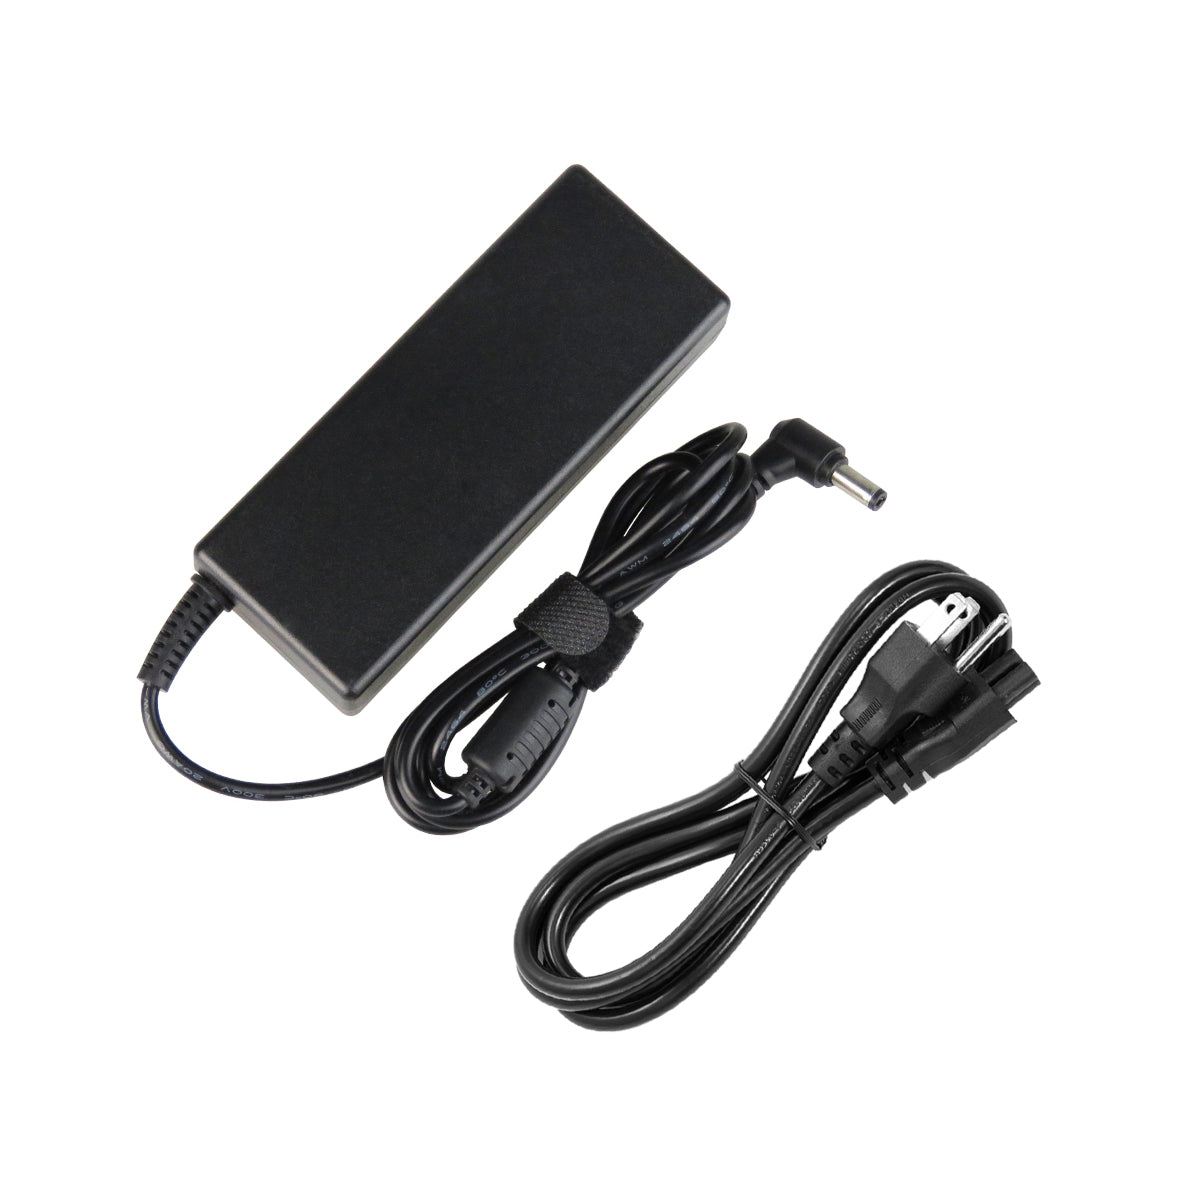 AC Adapter Charger for ASUS s56ca Series Notebook.